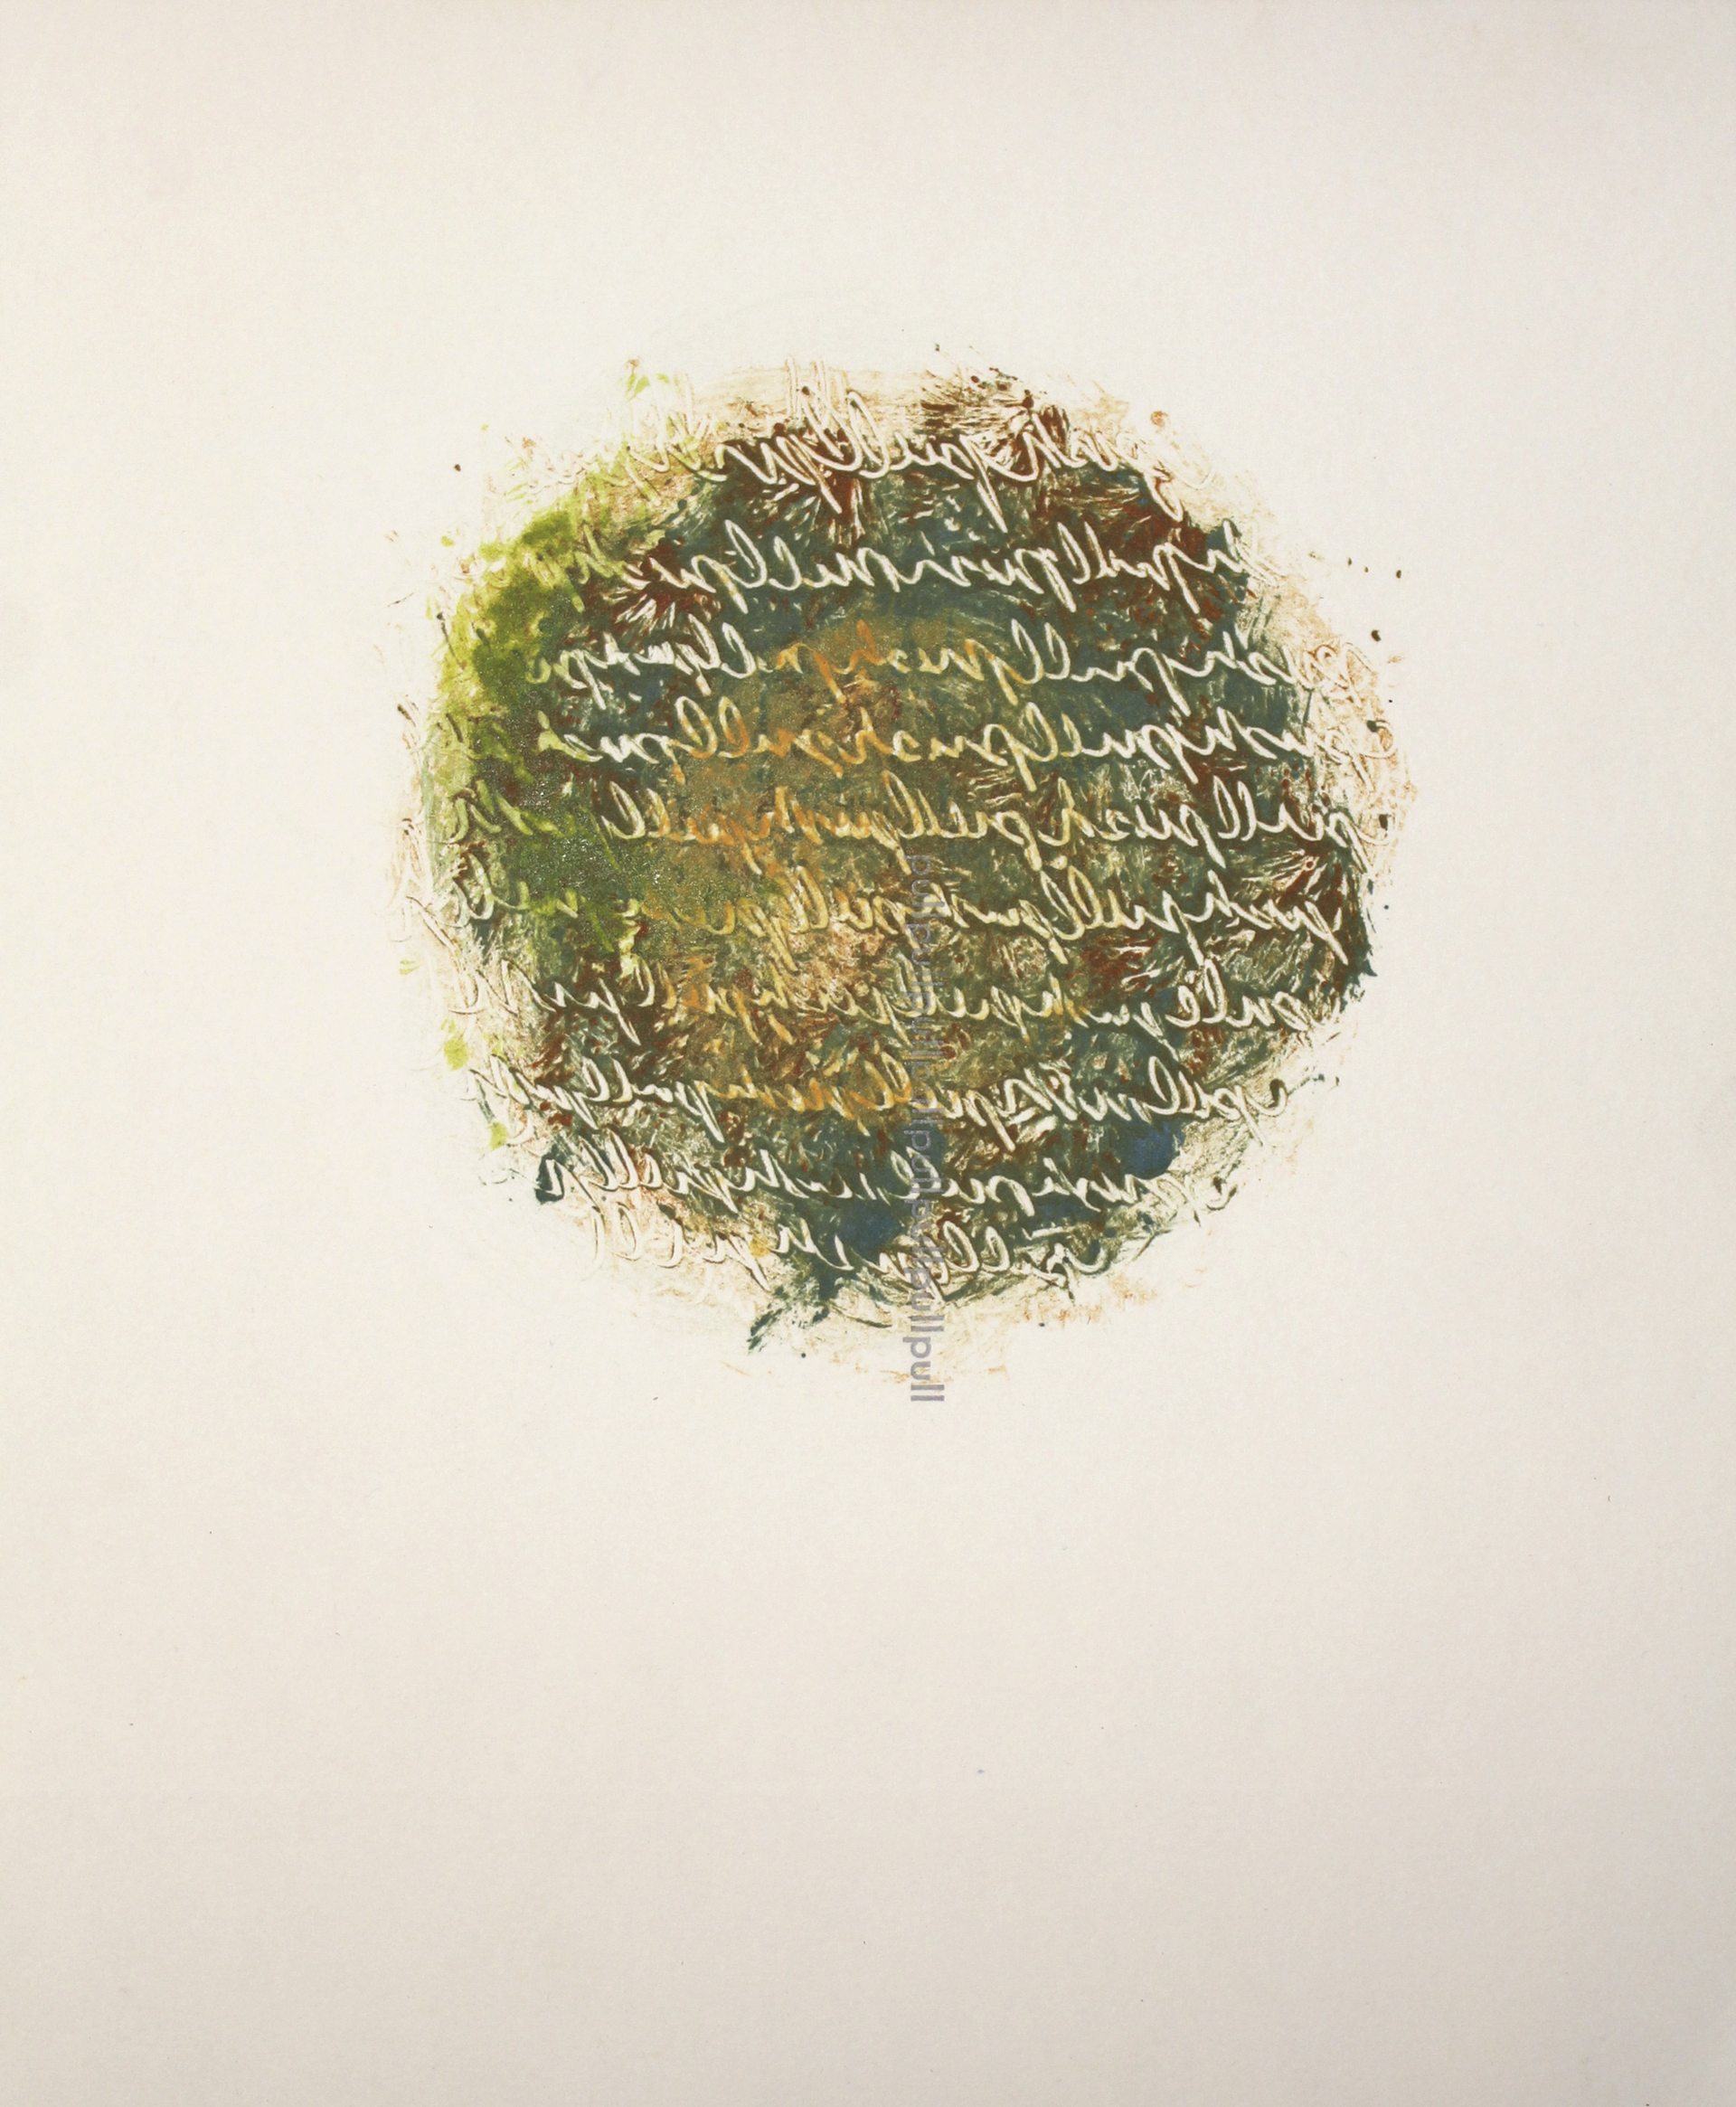 "Dissolution of Structure [Thought 1]" monotype + letterpress print by Amy Redmond (Amada Press)